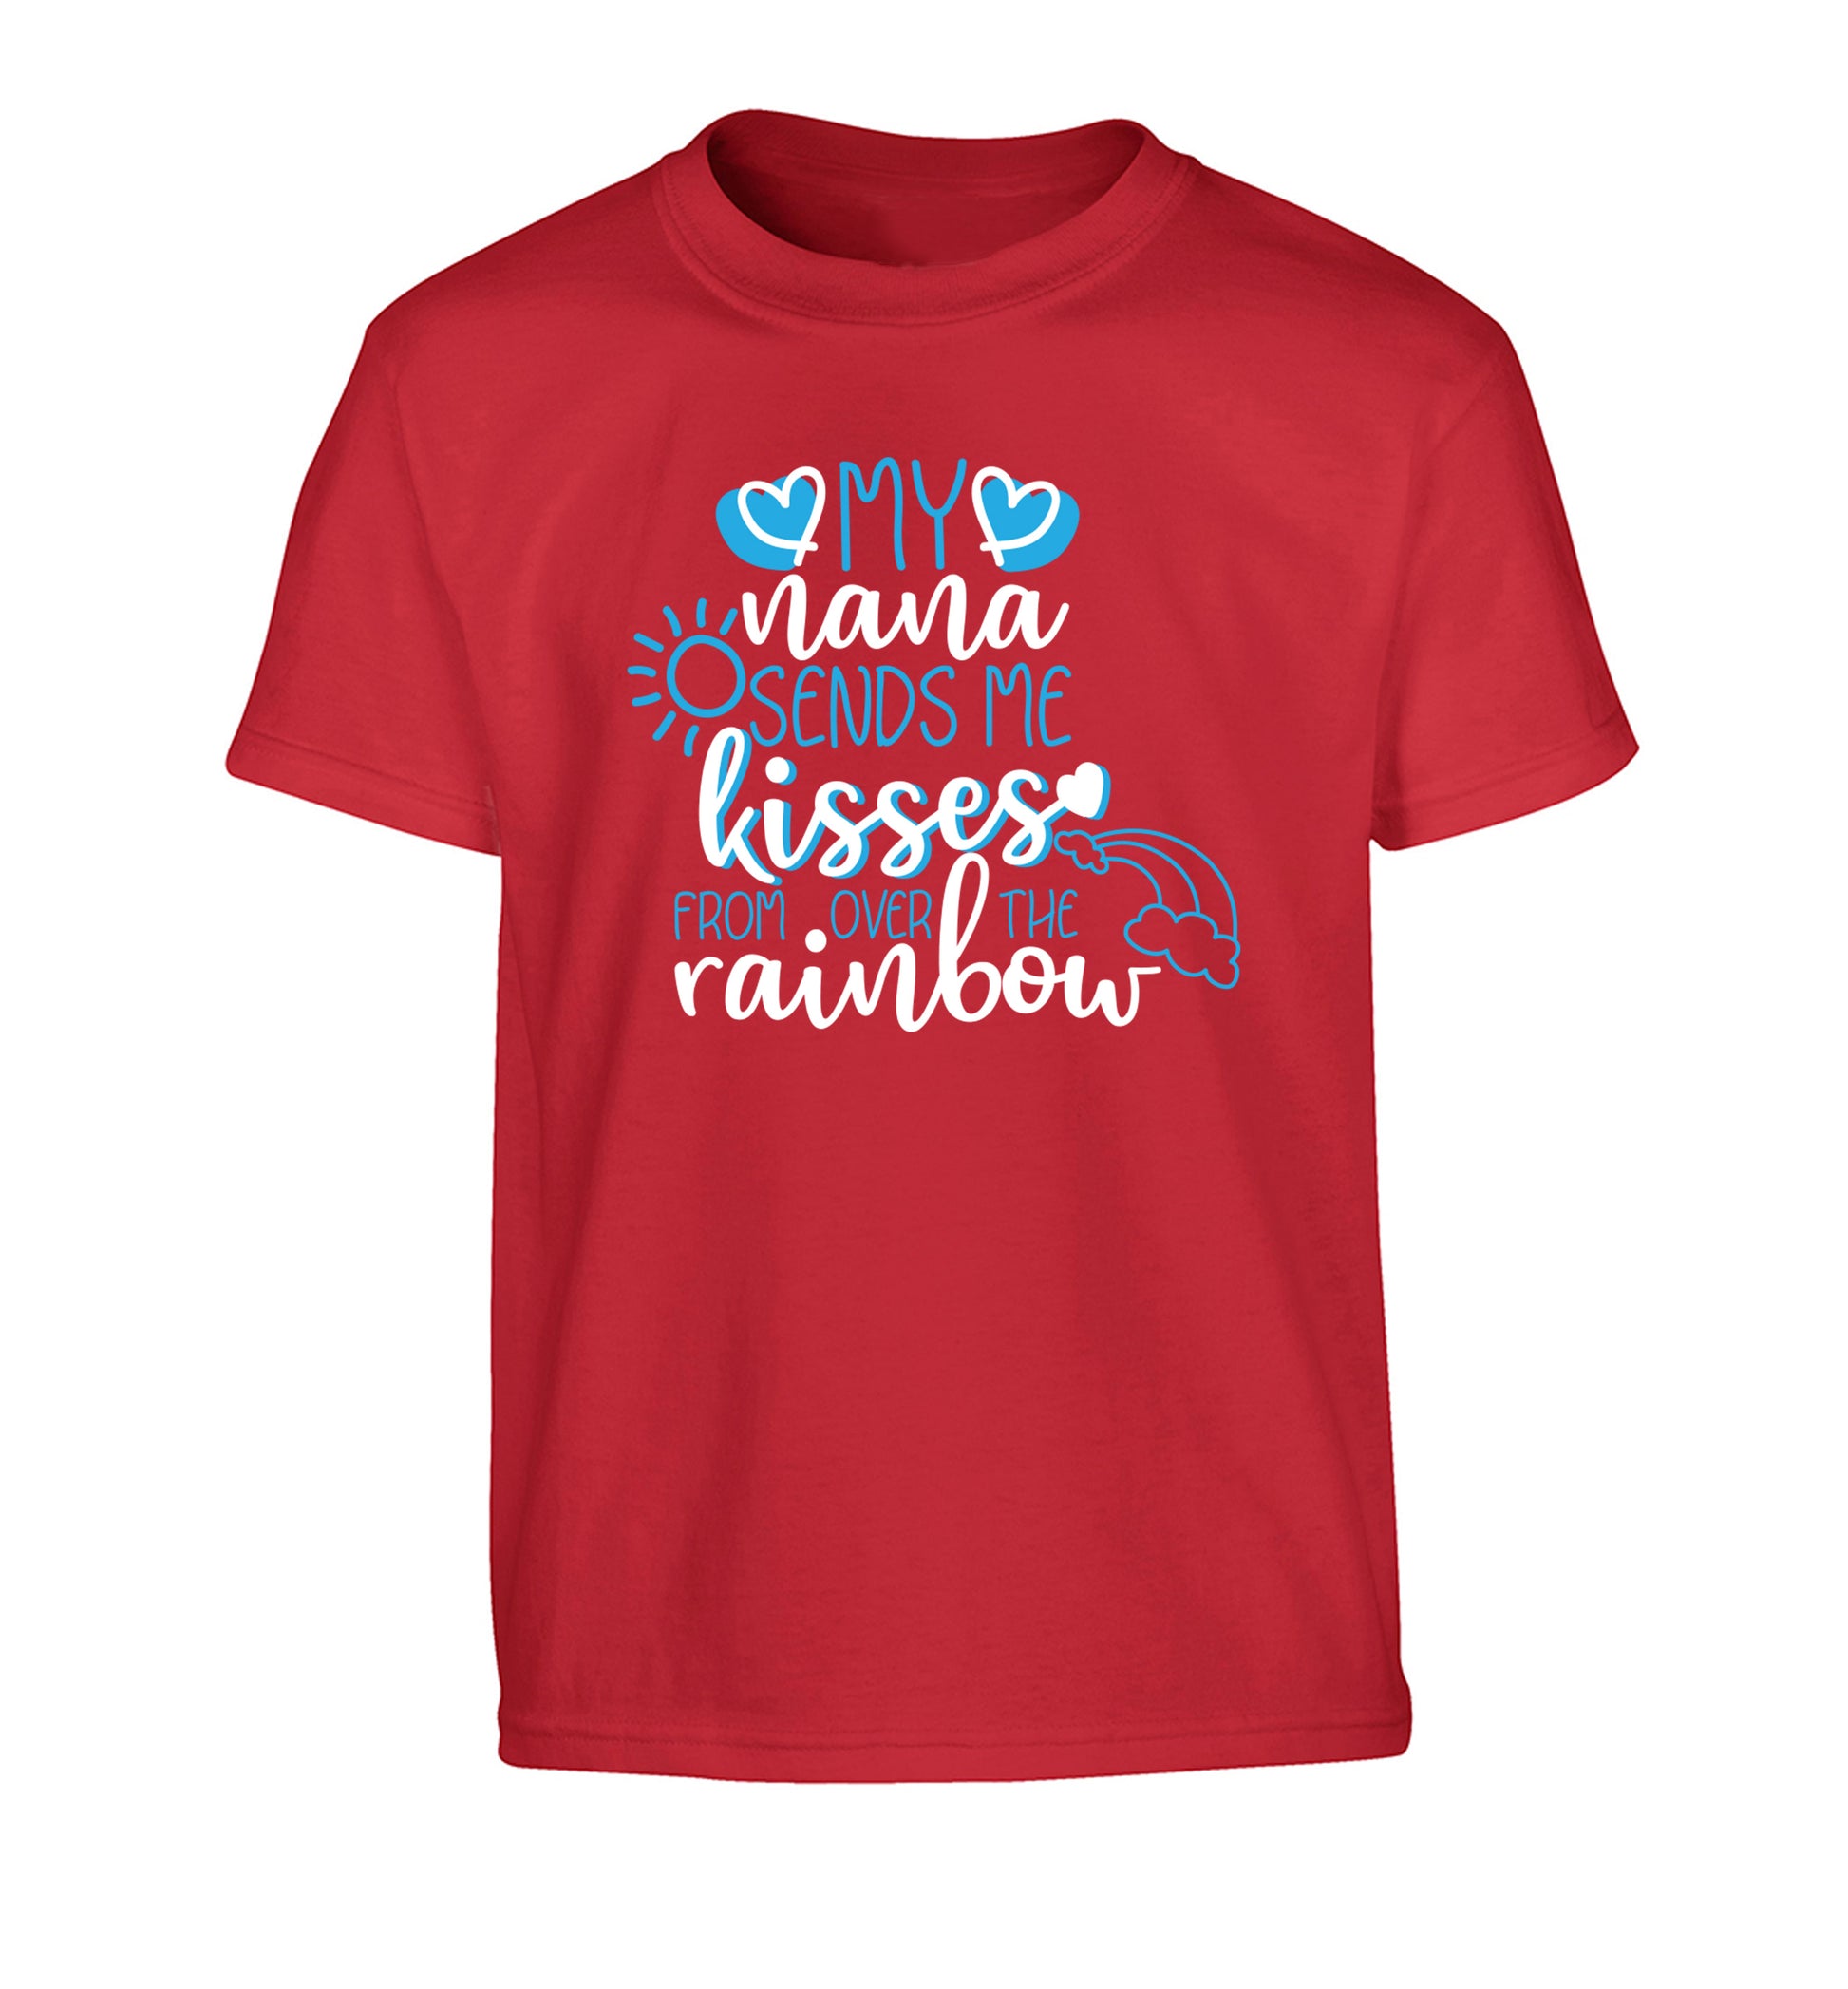 My nana sends me kisses from over the rainbow Children's red Tshirt 12-13 Years